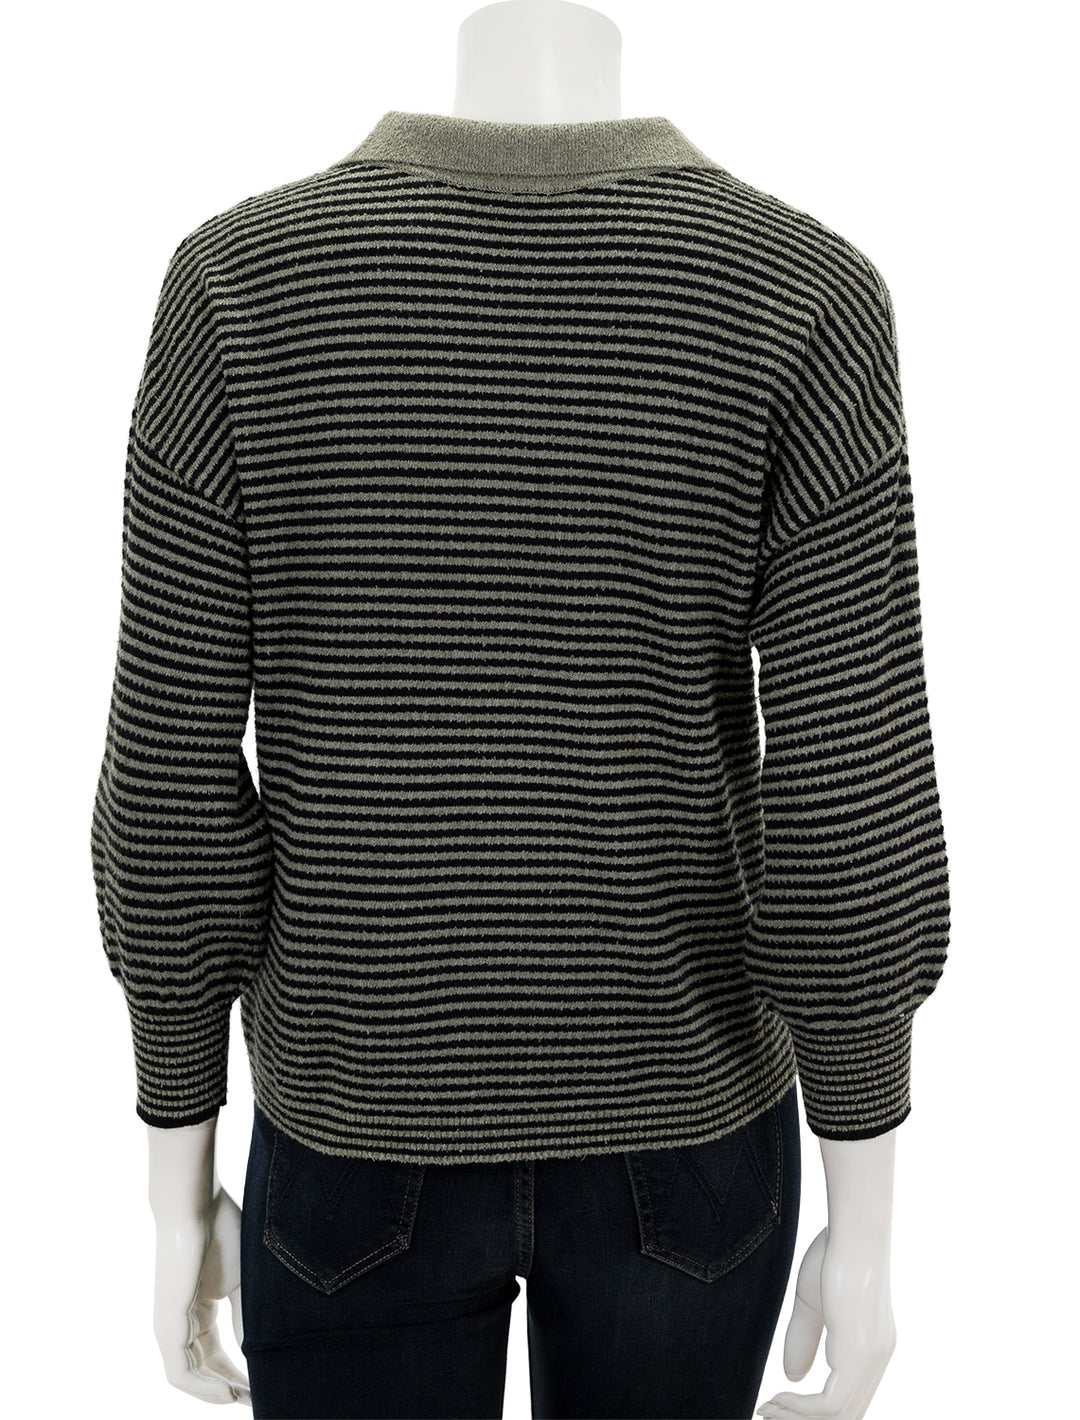 Back view of Lilla P.'s easy polo sweater.